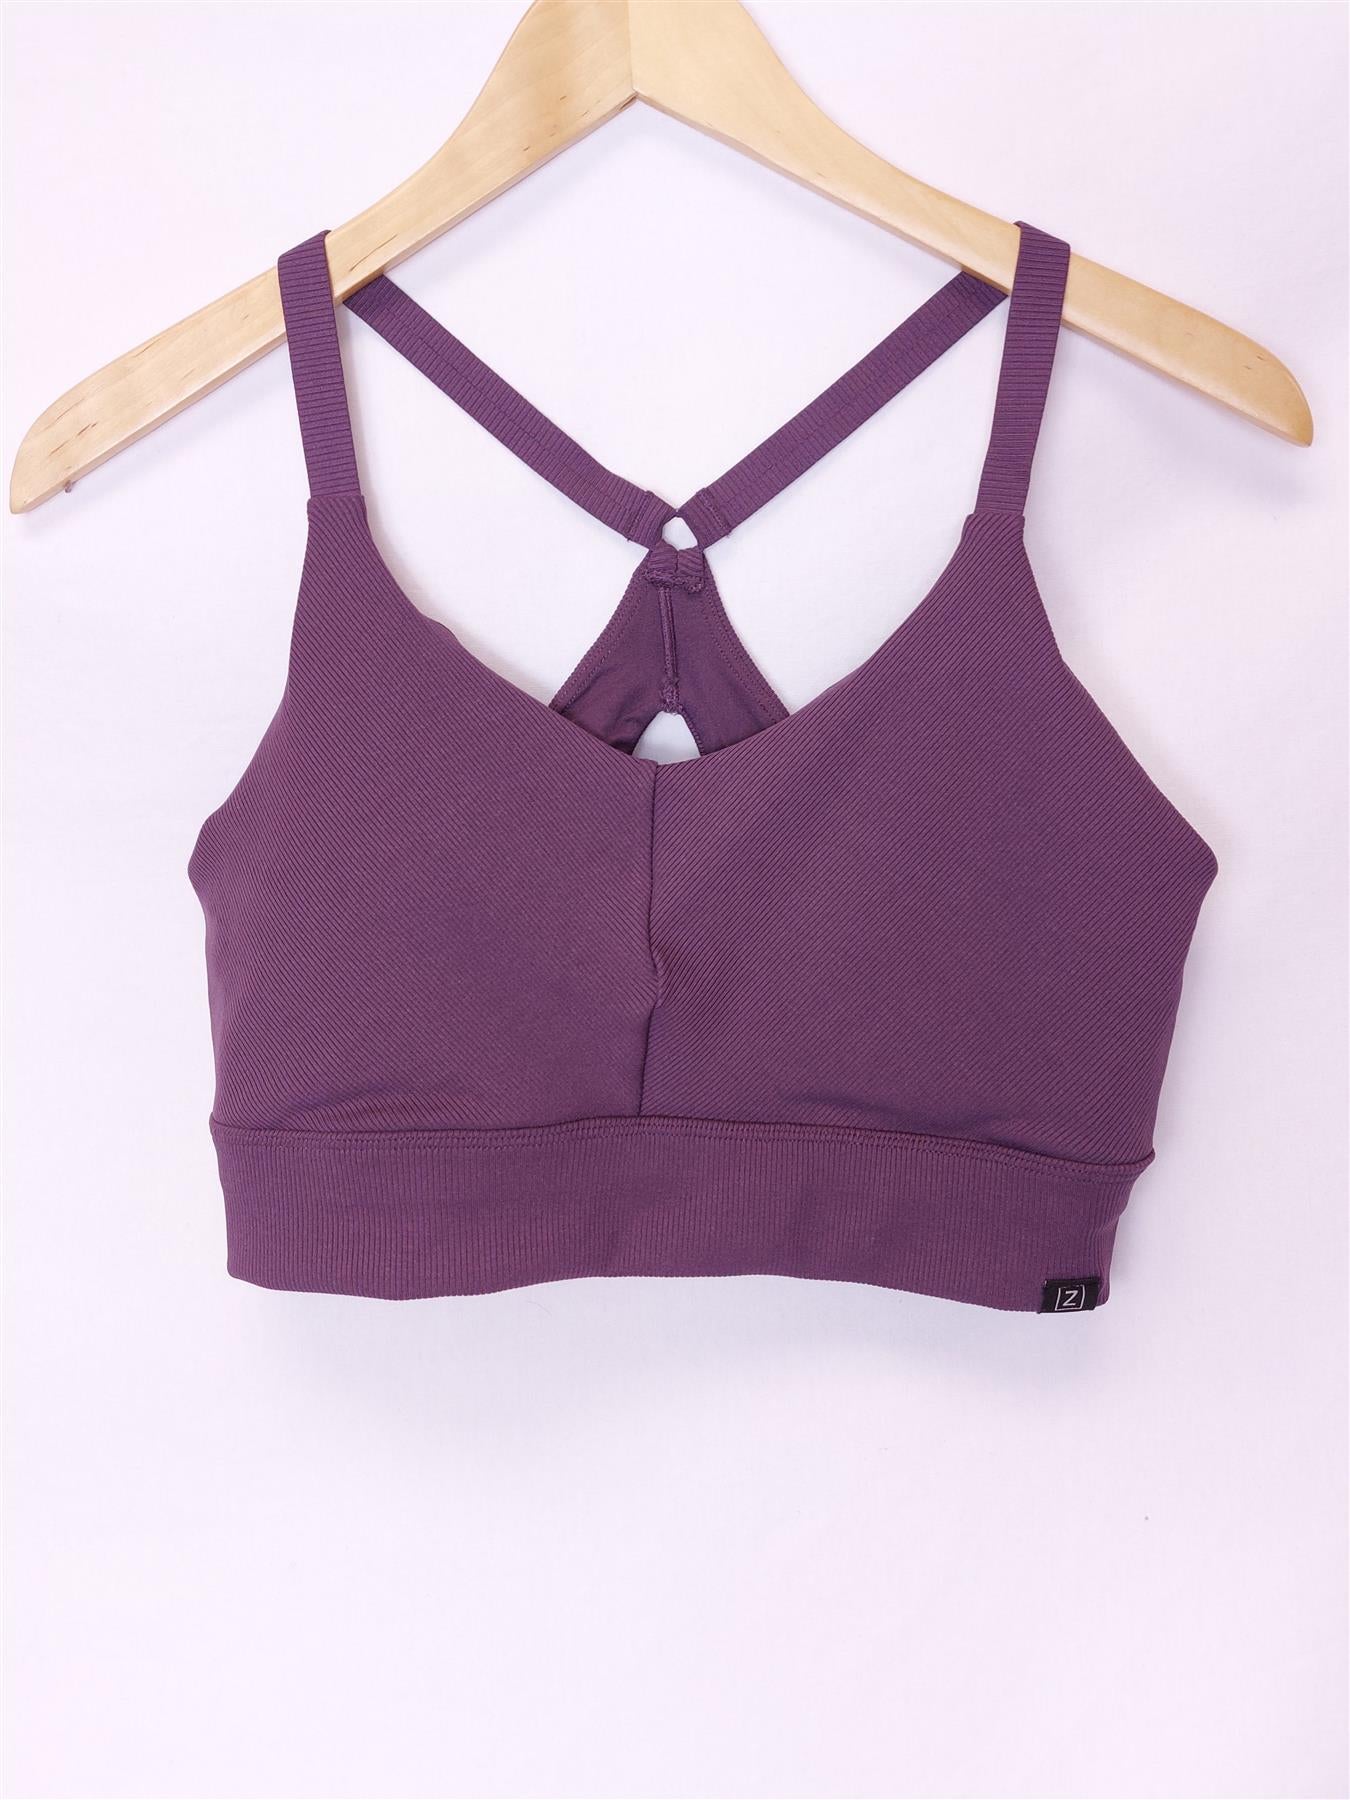 Zobha Ribbed Sports Bra Yoga Top Non-Wired Lightly Padded Racerback Plum Purple